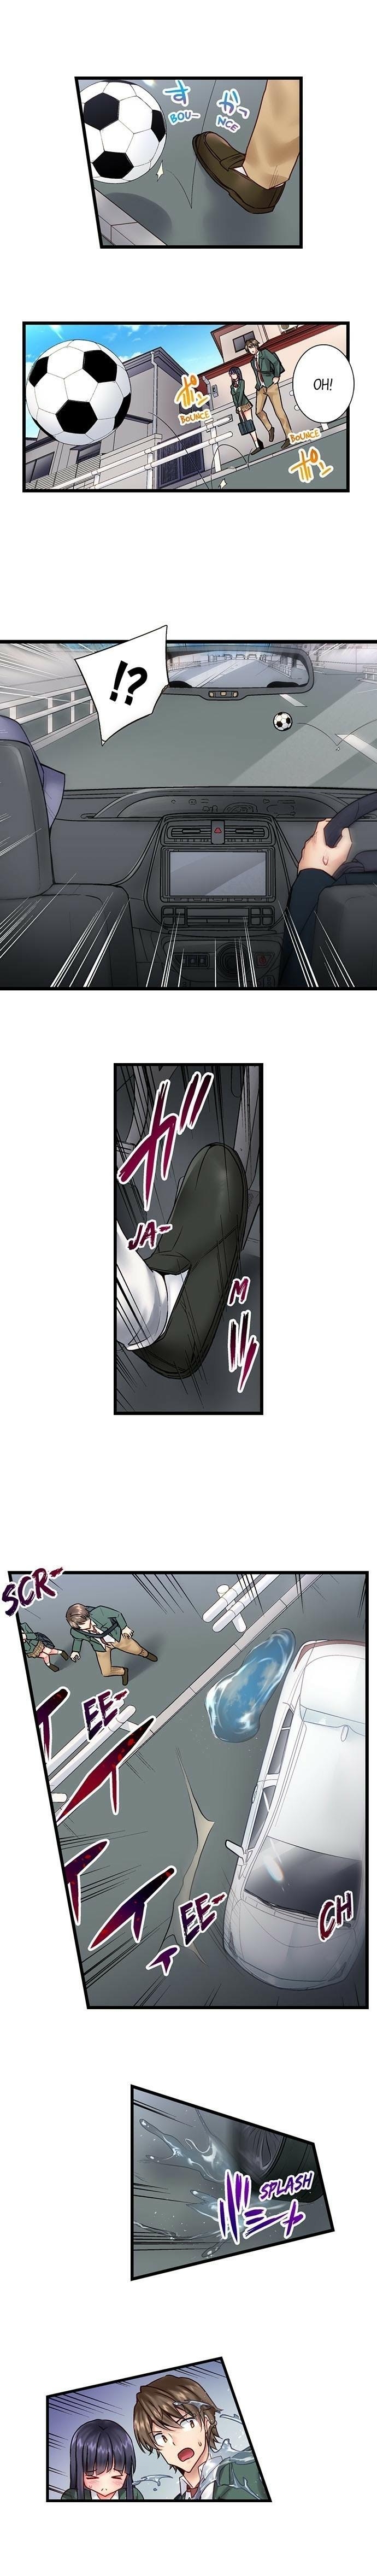 [Yuuki HB] "Hypnotized" Sex with My Brother Ch.21/? [English] [Ongoing] 92